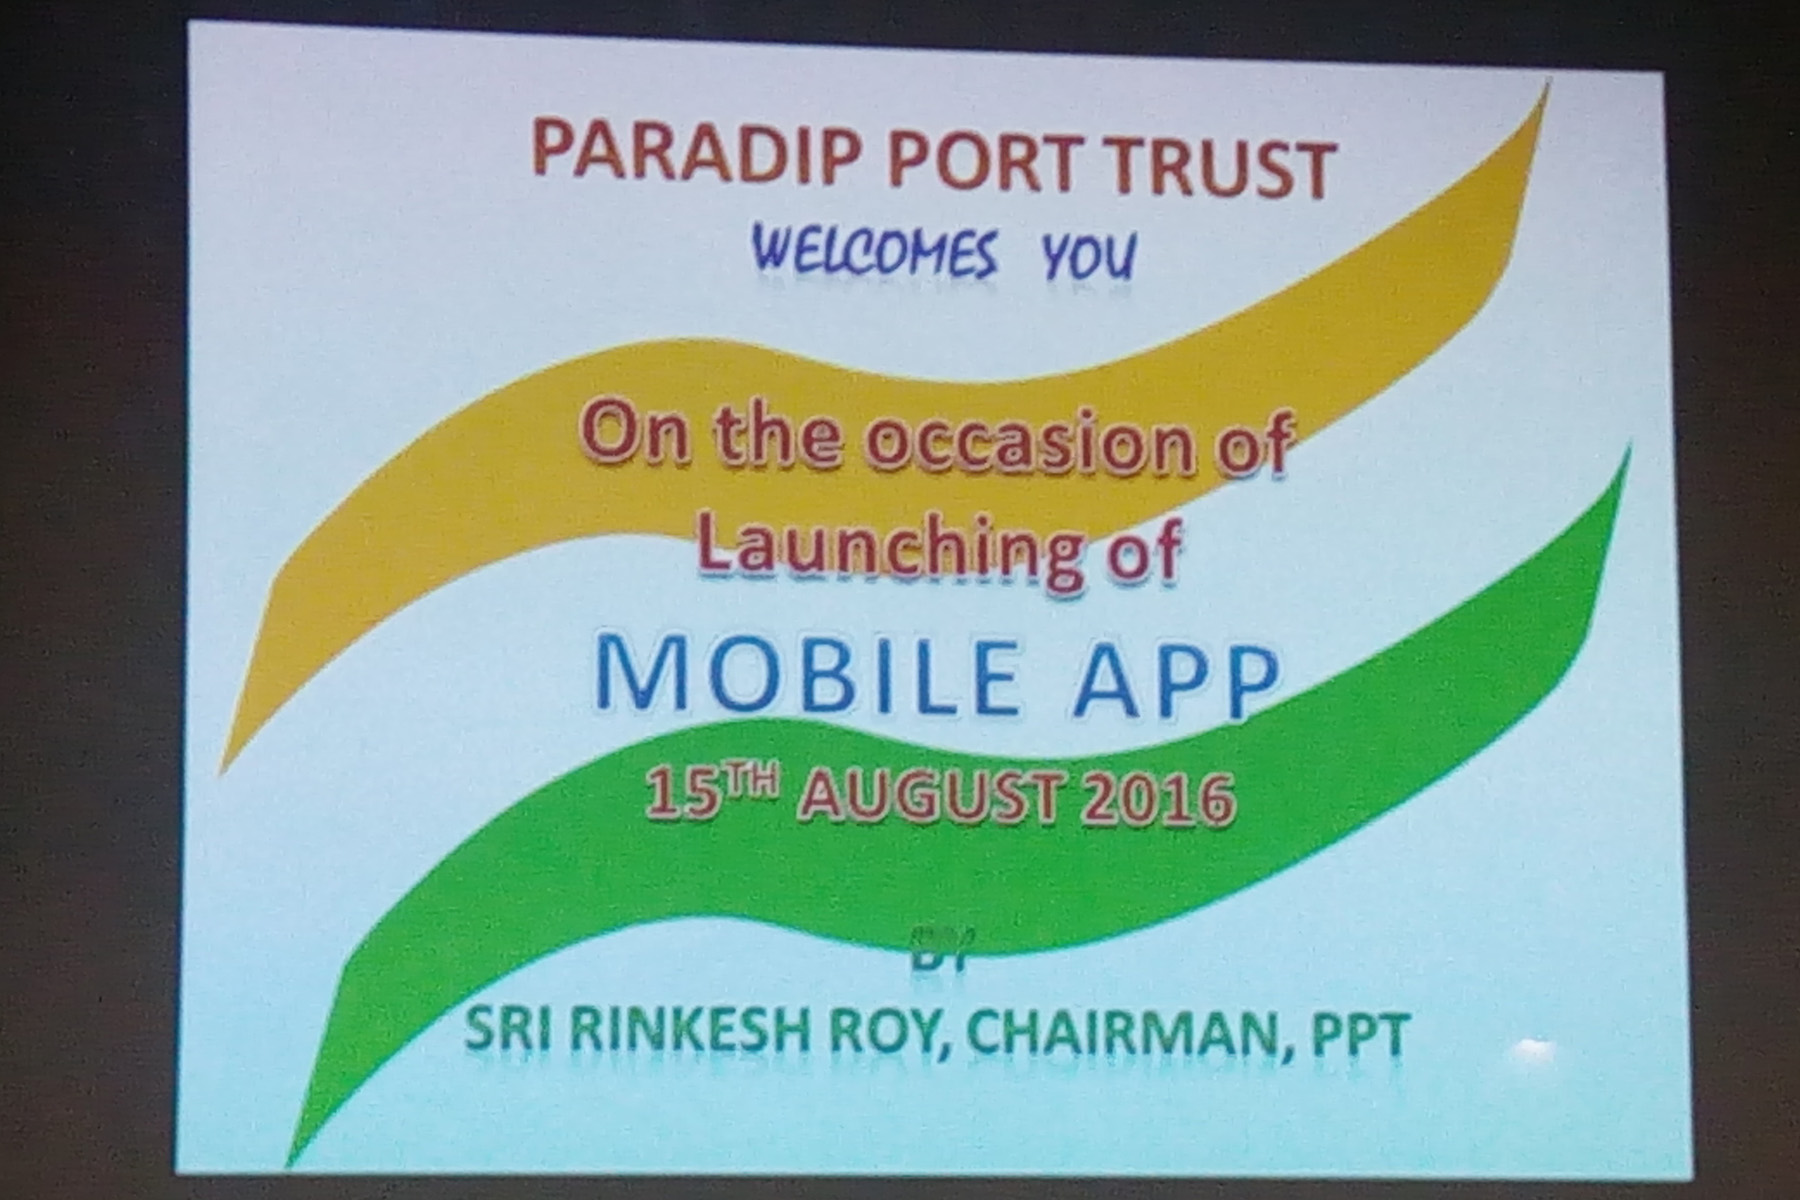 Mobile App Inauguration on 15th Aug 2016